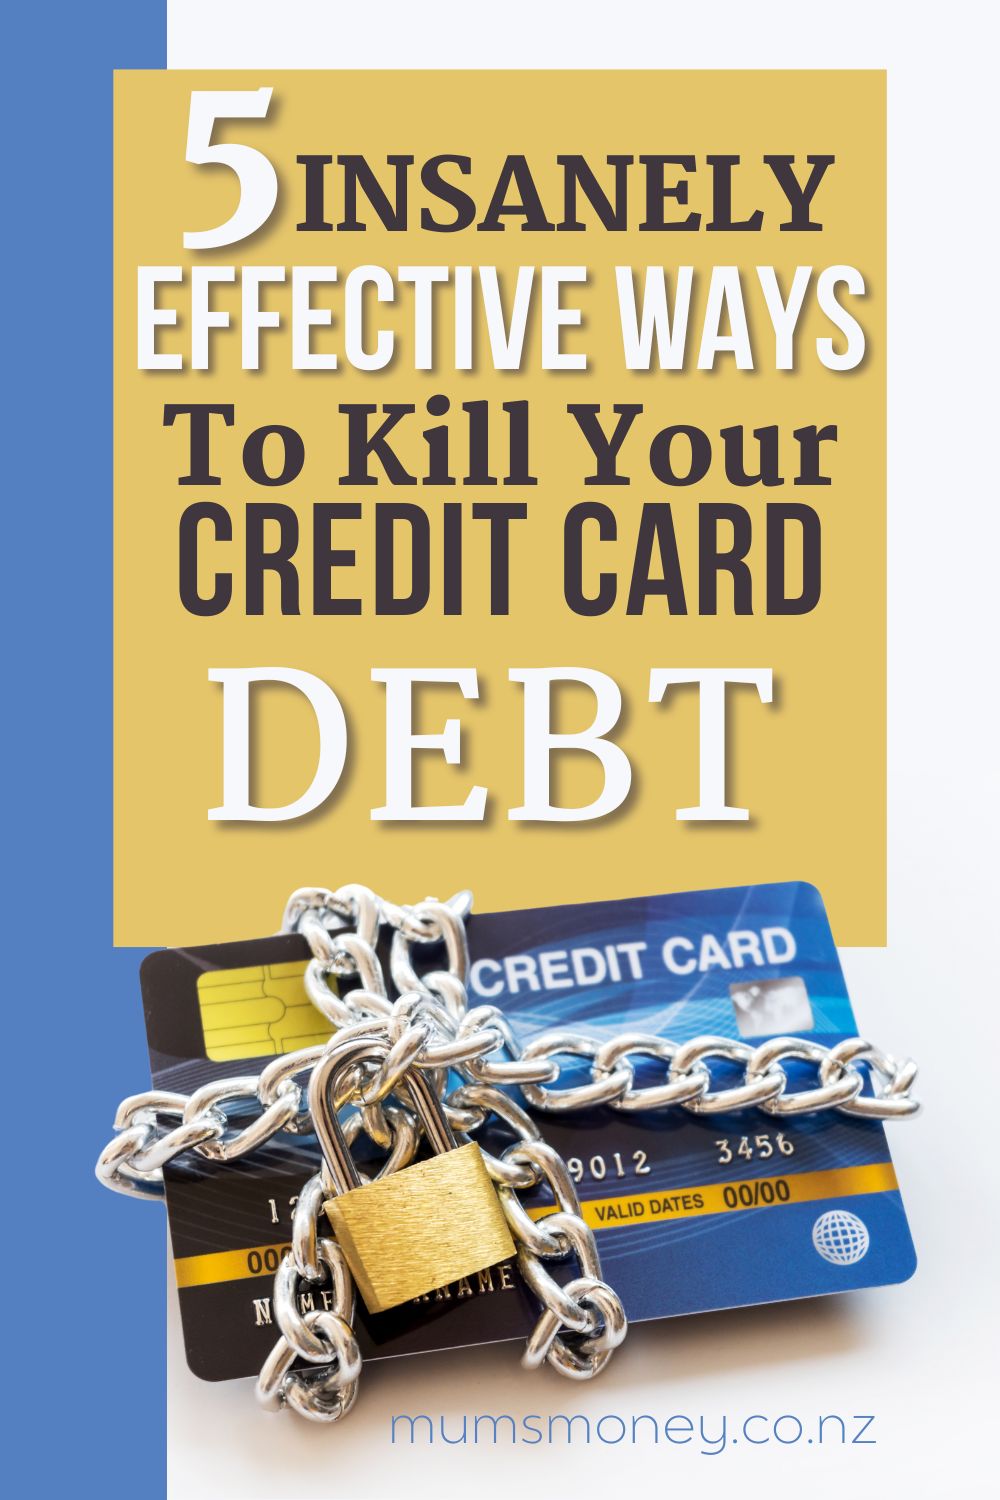 Effective Ways To Kill Your Credit Card Debt